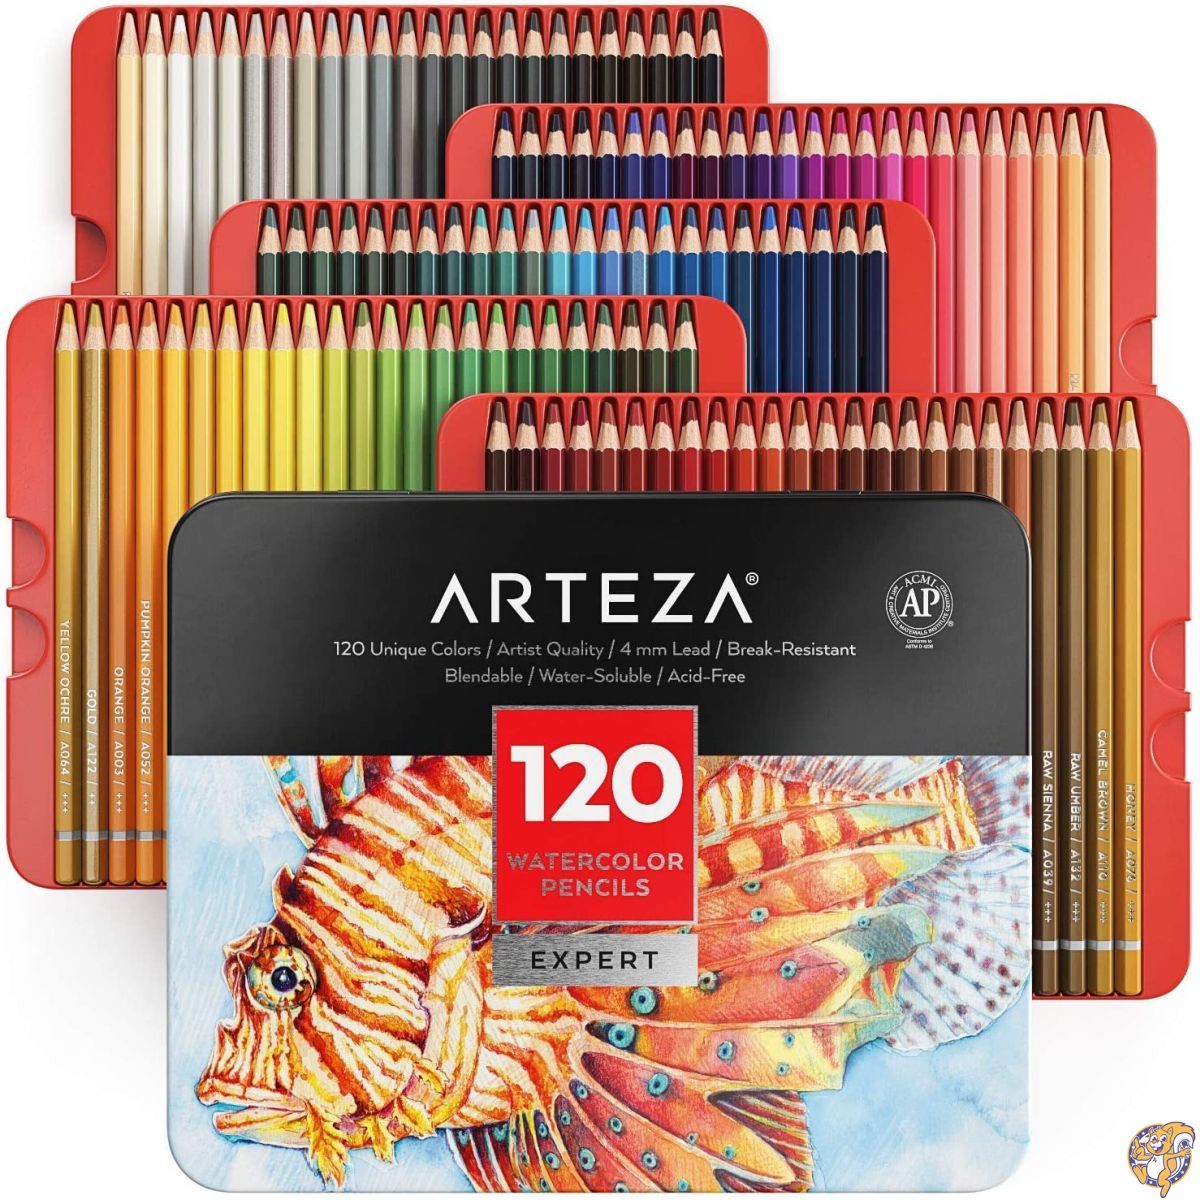 Arteza Professional Watercolor Pencils for Adults Kids, Set of 120, 送料無料